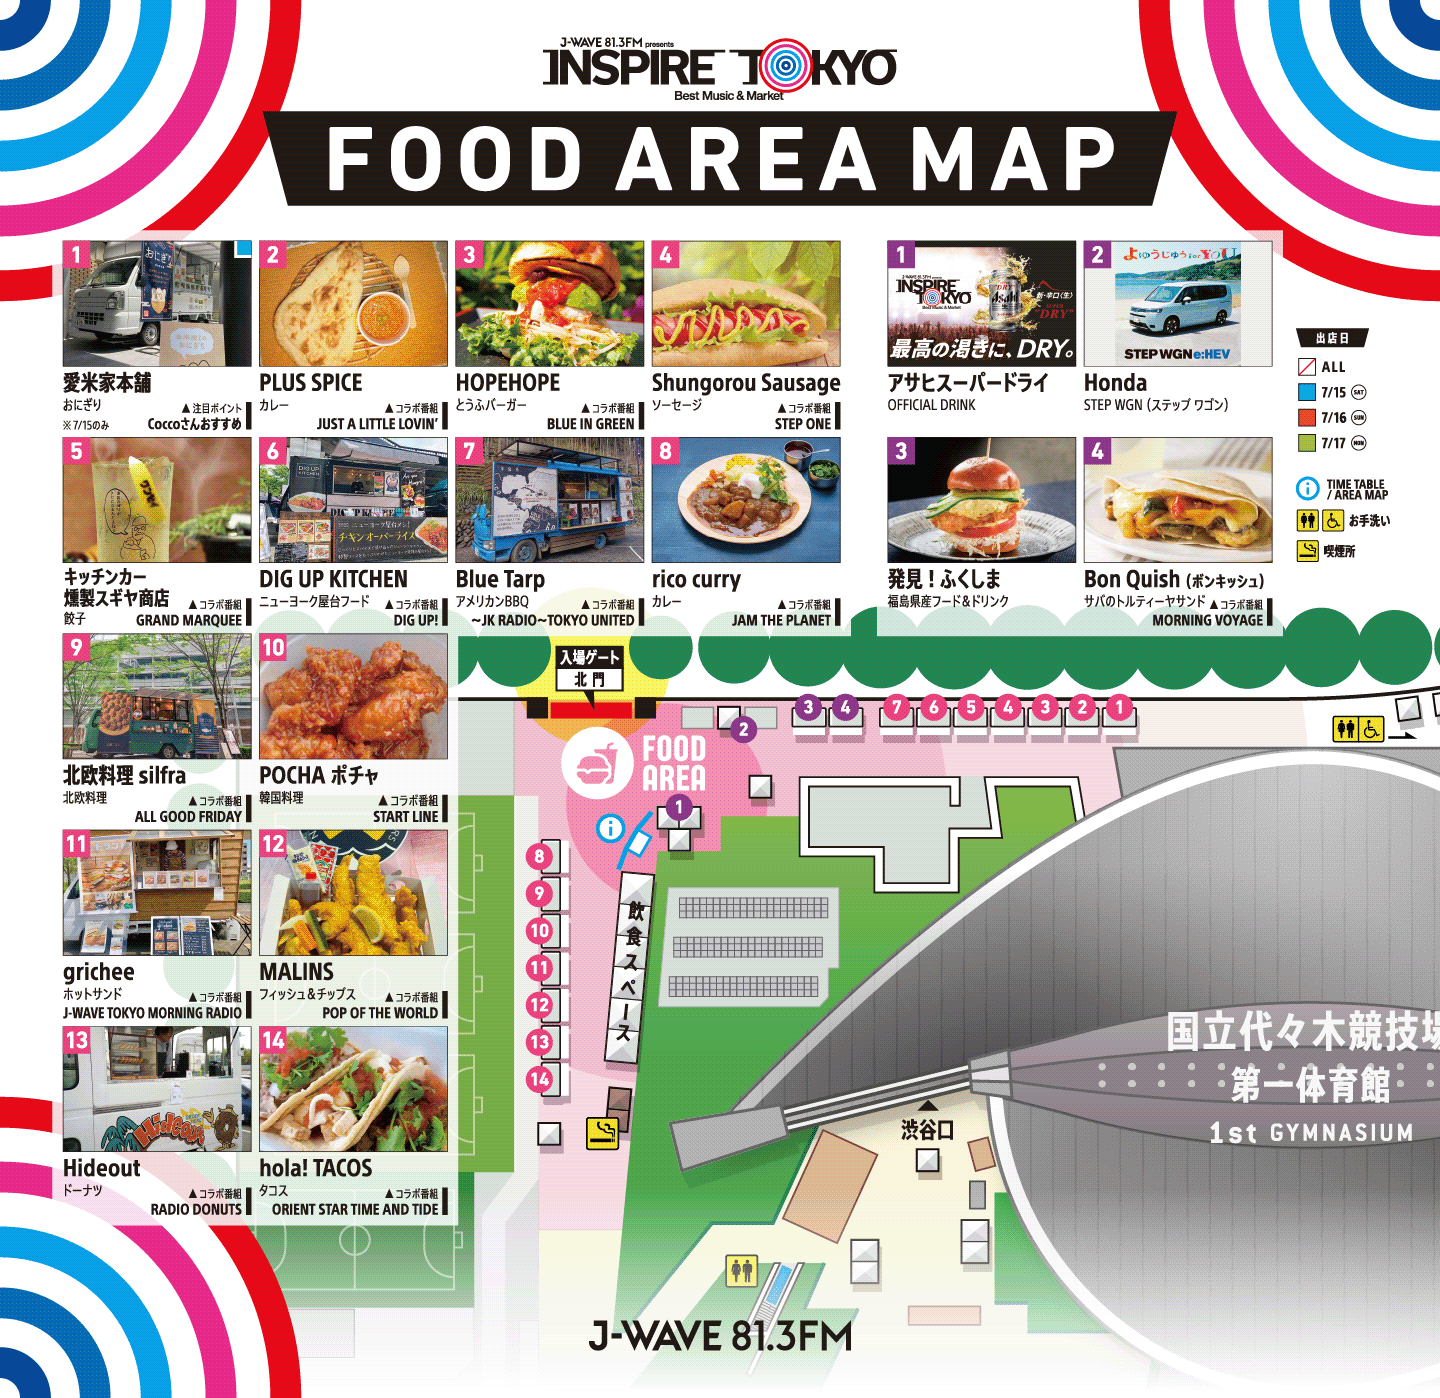 FOOD AREA MAP